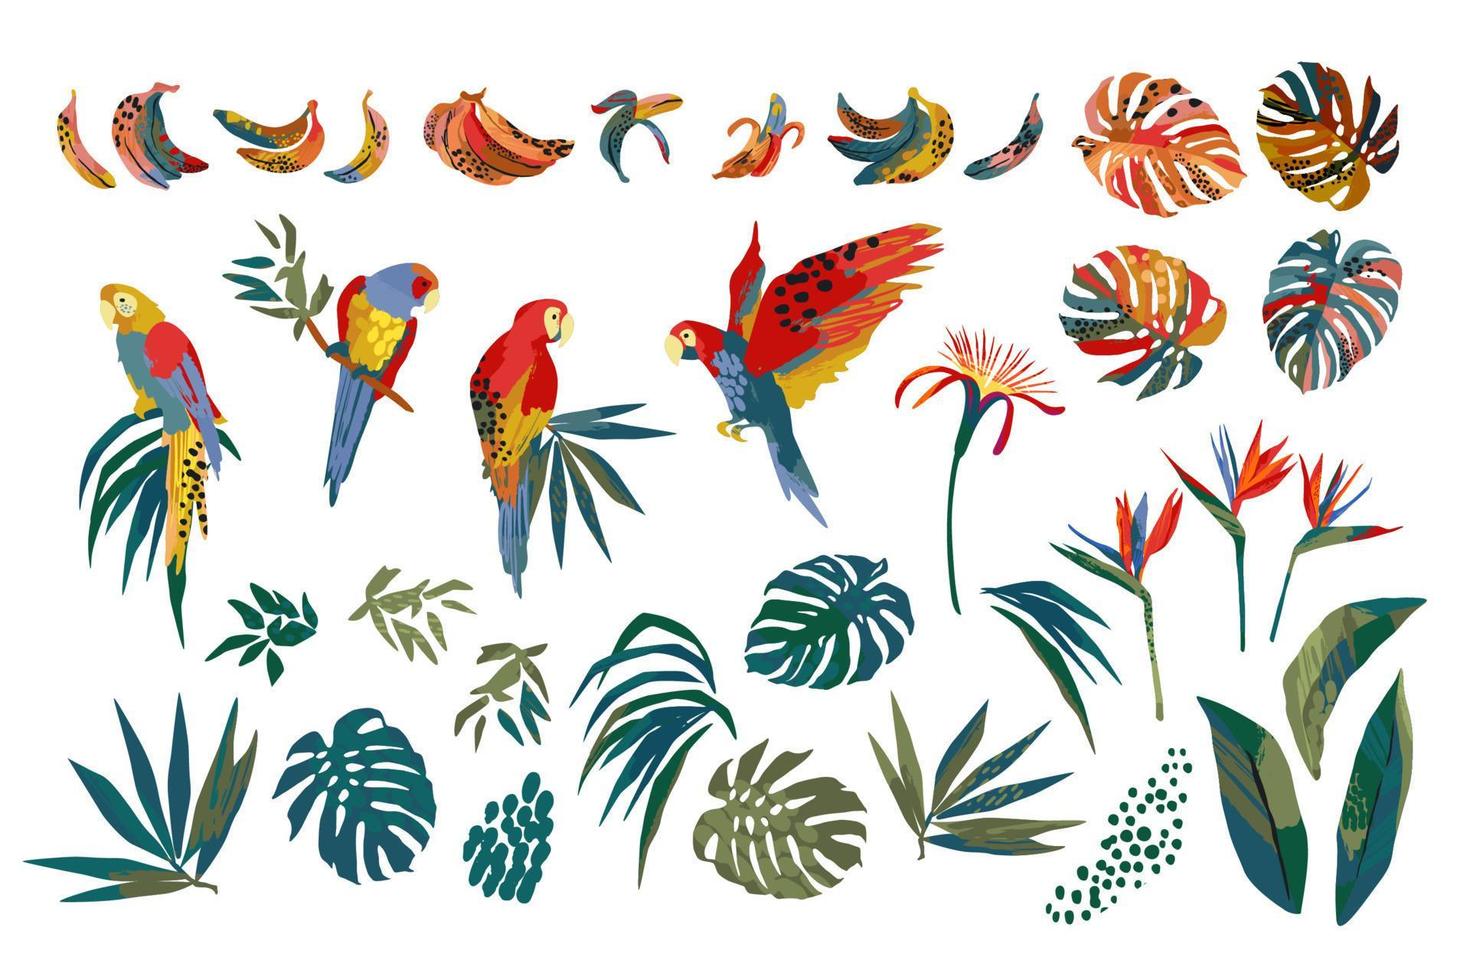 Vector illustrations of parrots, tropical leaves, bananas. Modern exotic design. Clipart, isolated elements.